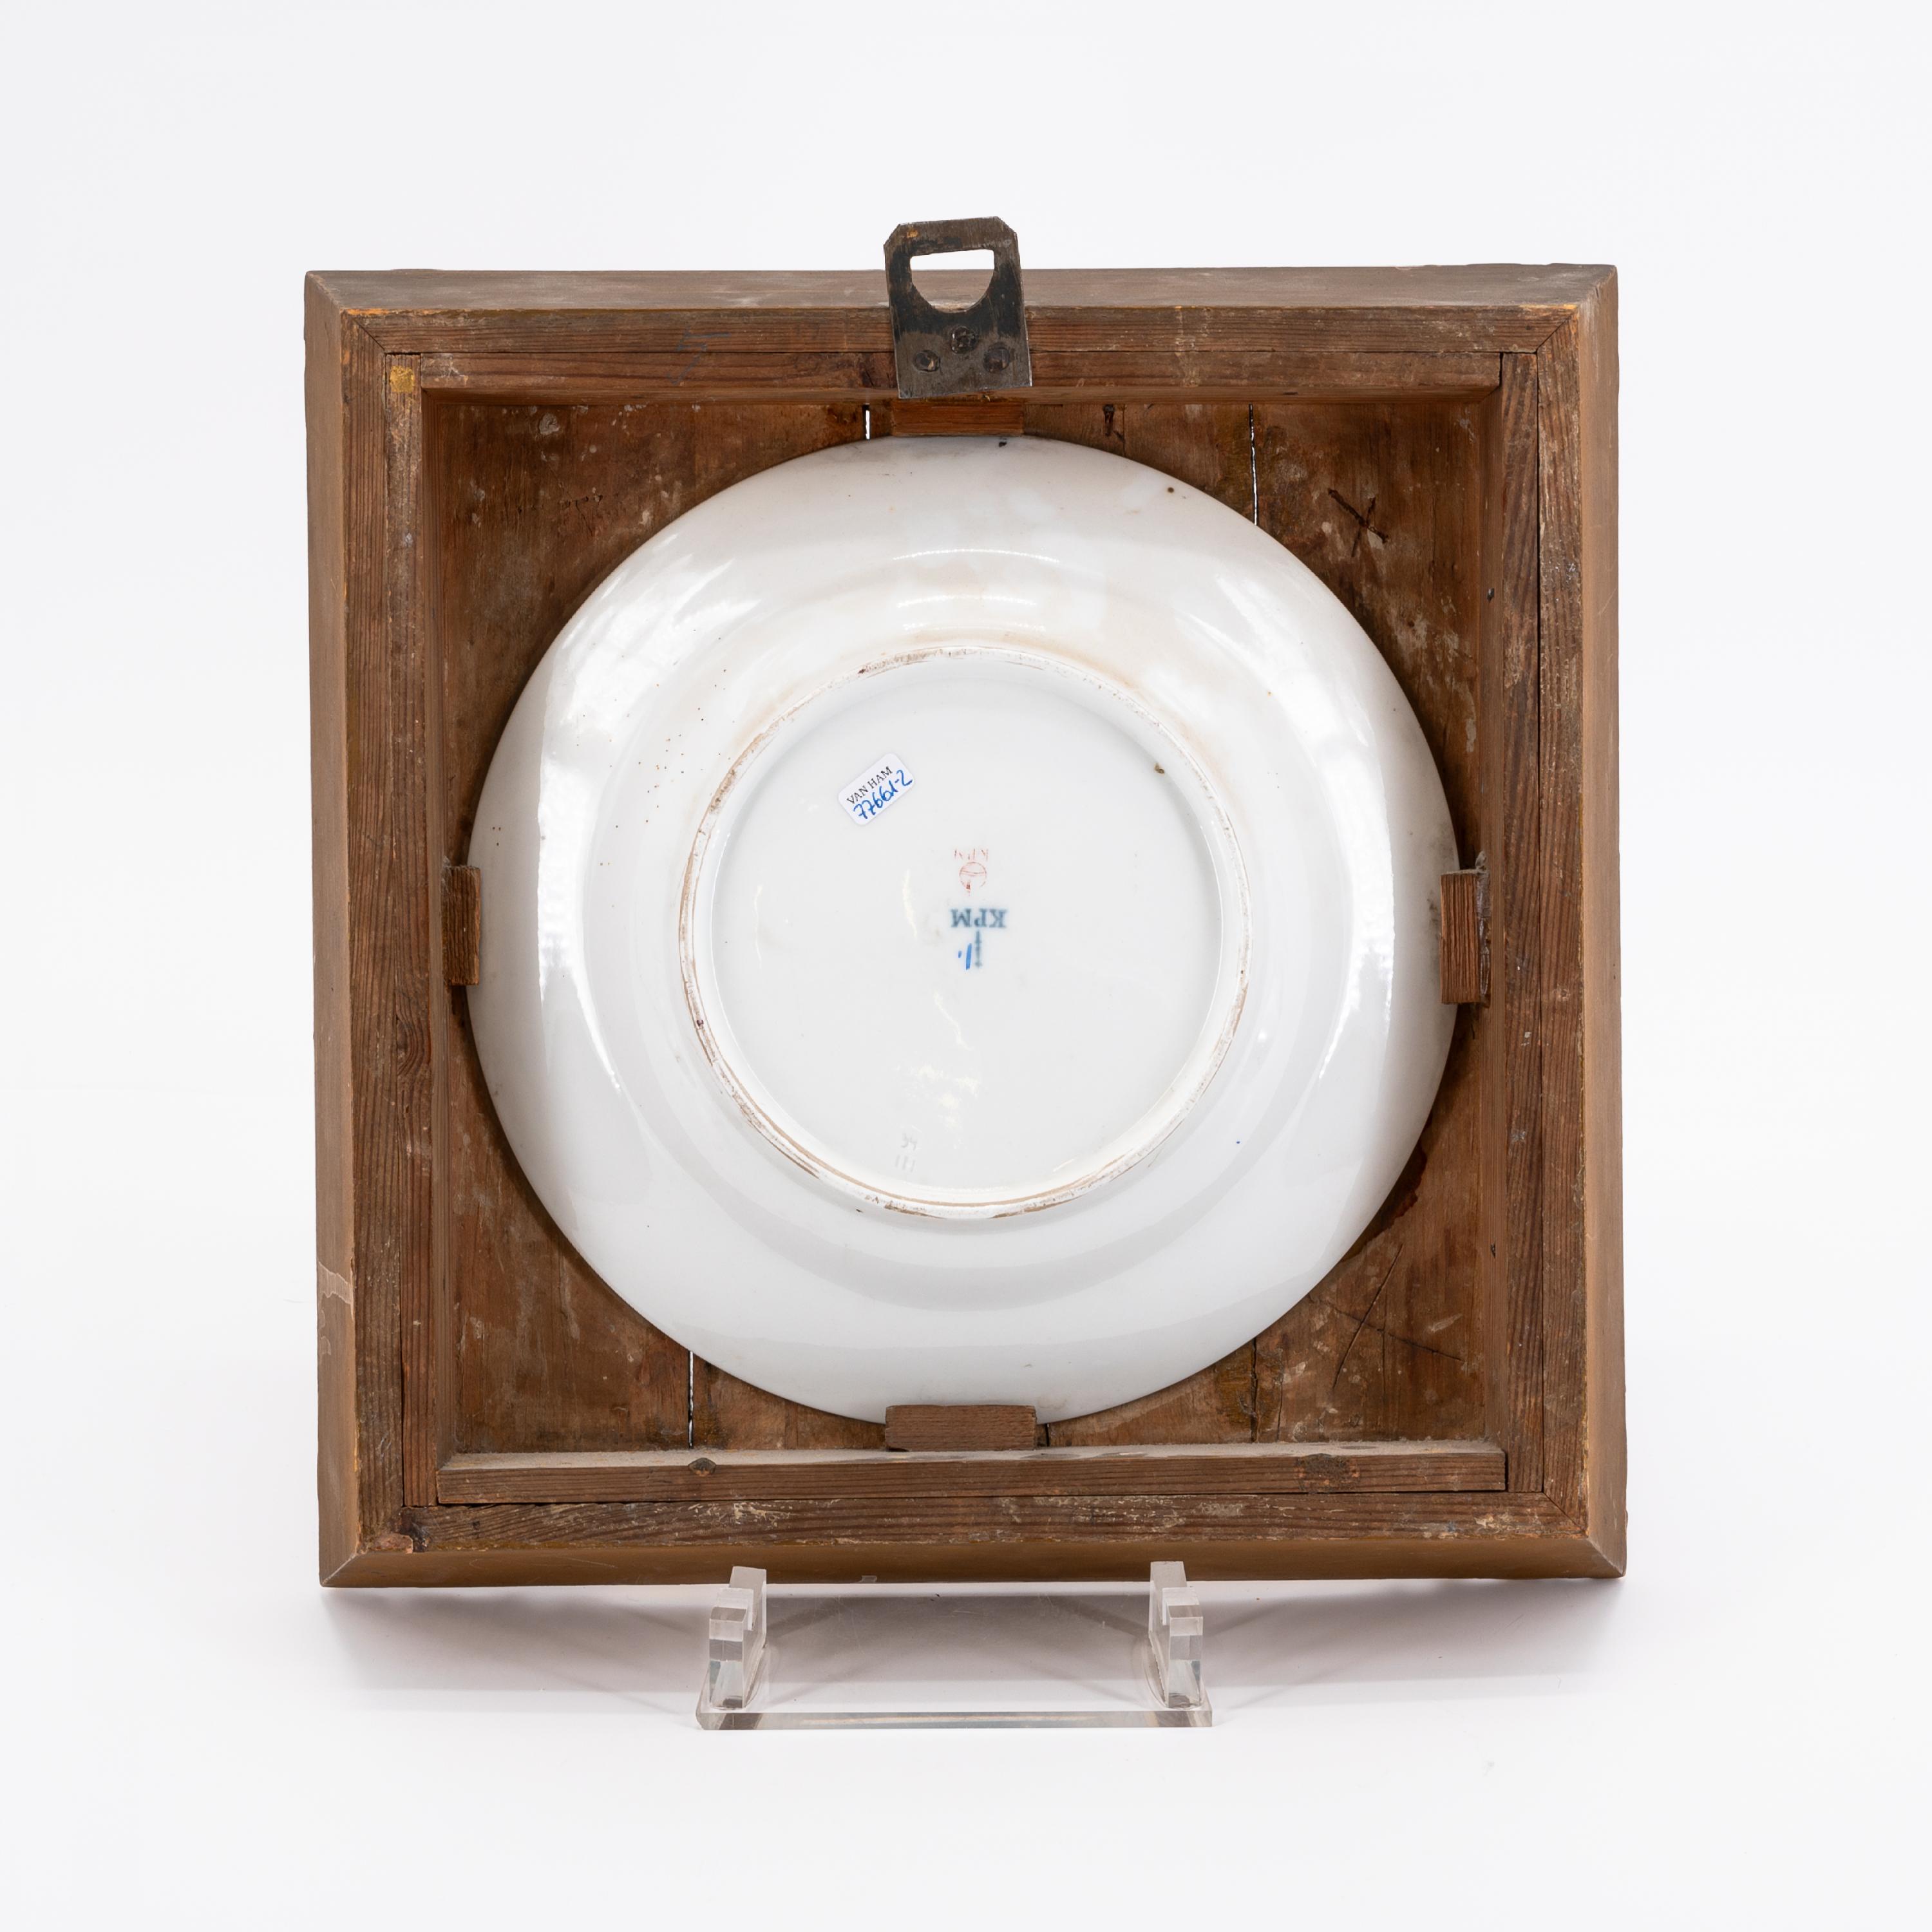 EXEPTIONAL SERIES OF TWELVE PORCELAIN PLATES WITH ROMANTIC VIEWS OF THE RHINE - Image 14 of 26